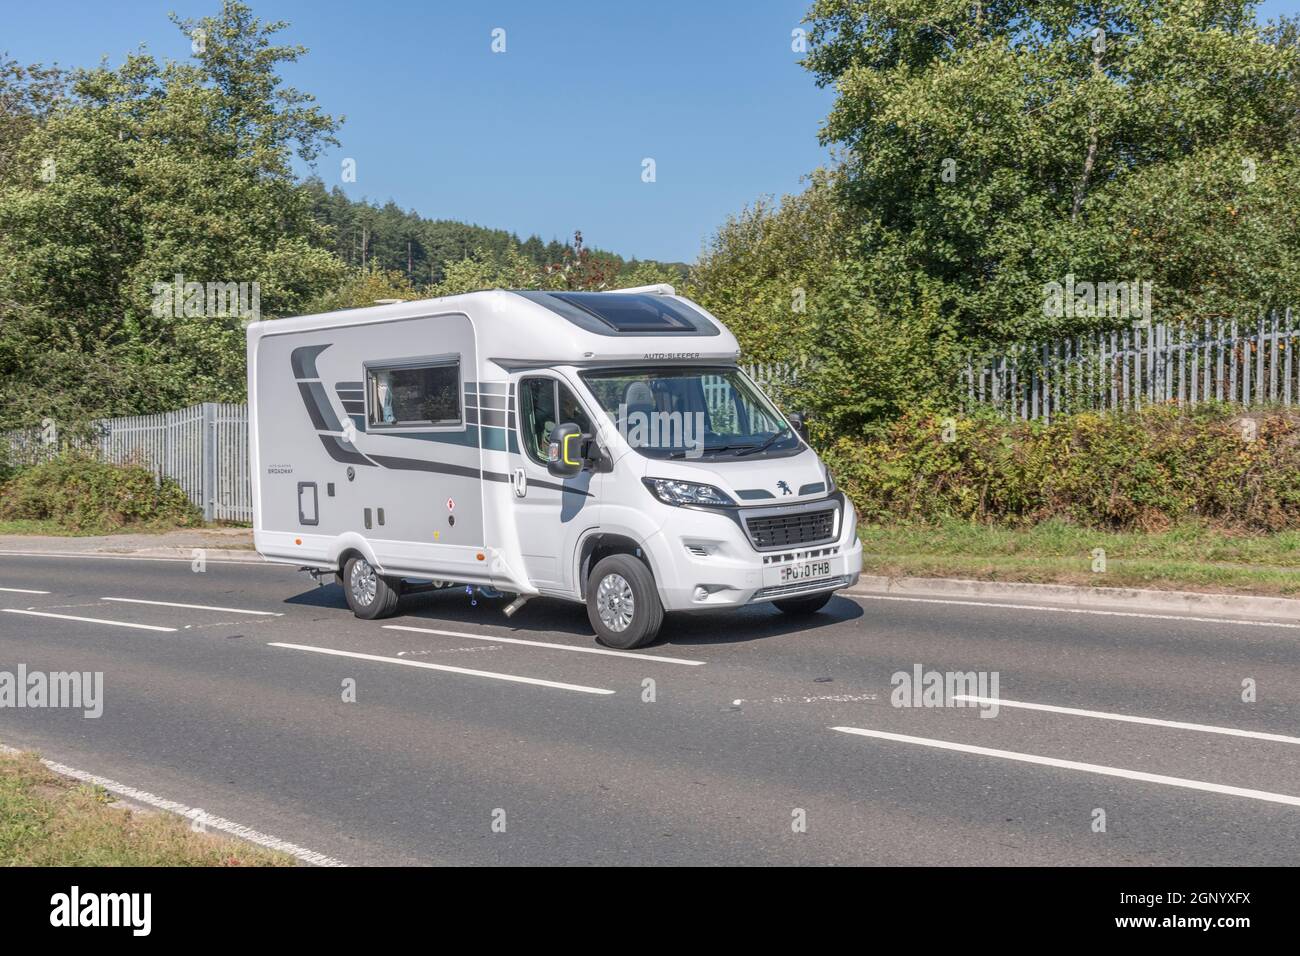 Auto-Sleeper Broadway motorhome travelling uphill on country road in Cornwall. For UK motorhomes, campervans, staycations in UK, alternative holidays. Stock Photo